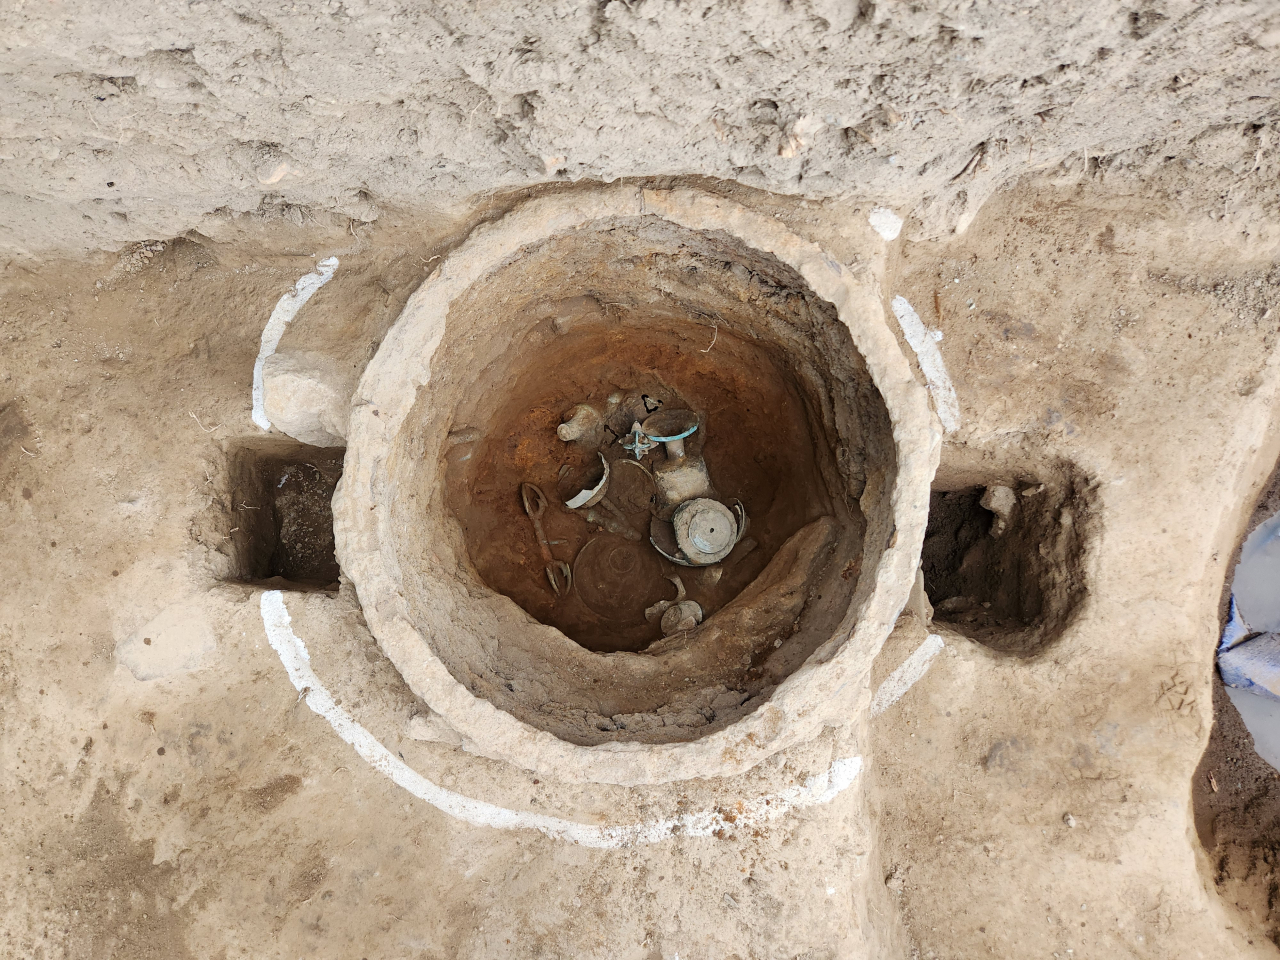 A large iron pot with Buddhist relics inside was discovered some 22 meters west of today's Heungryunsa Temple. (CHA)